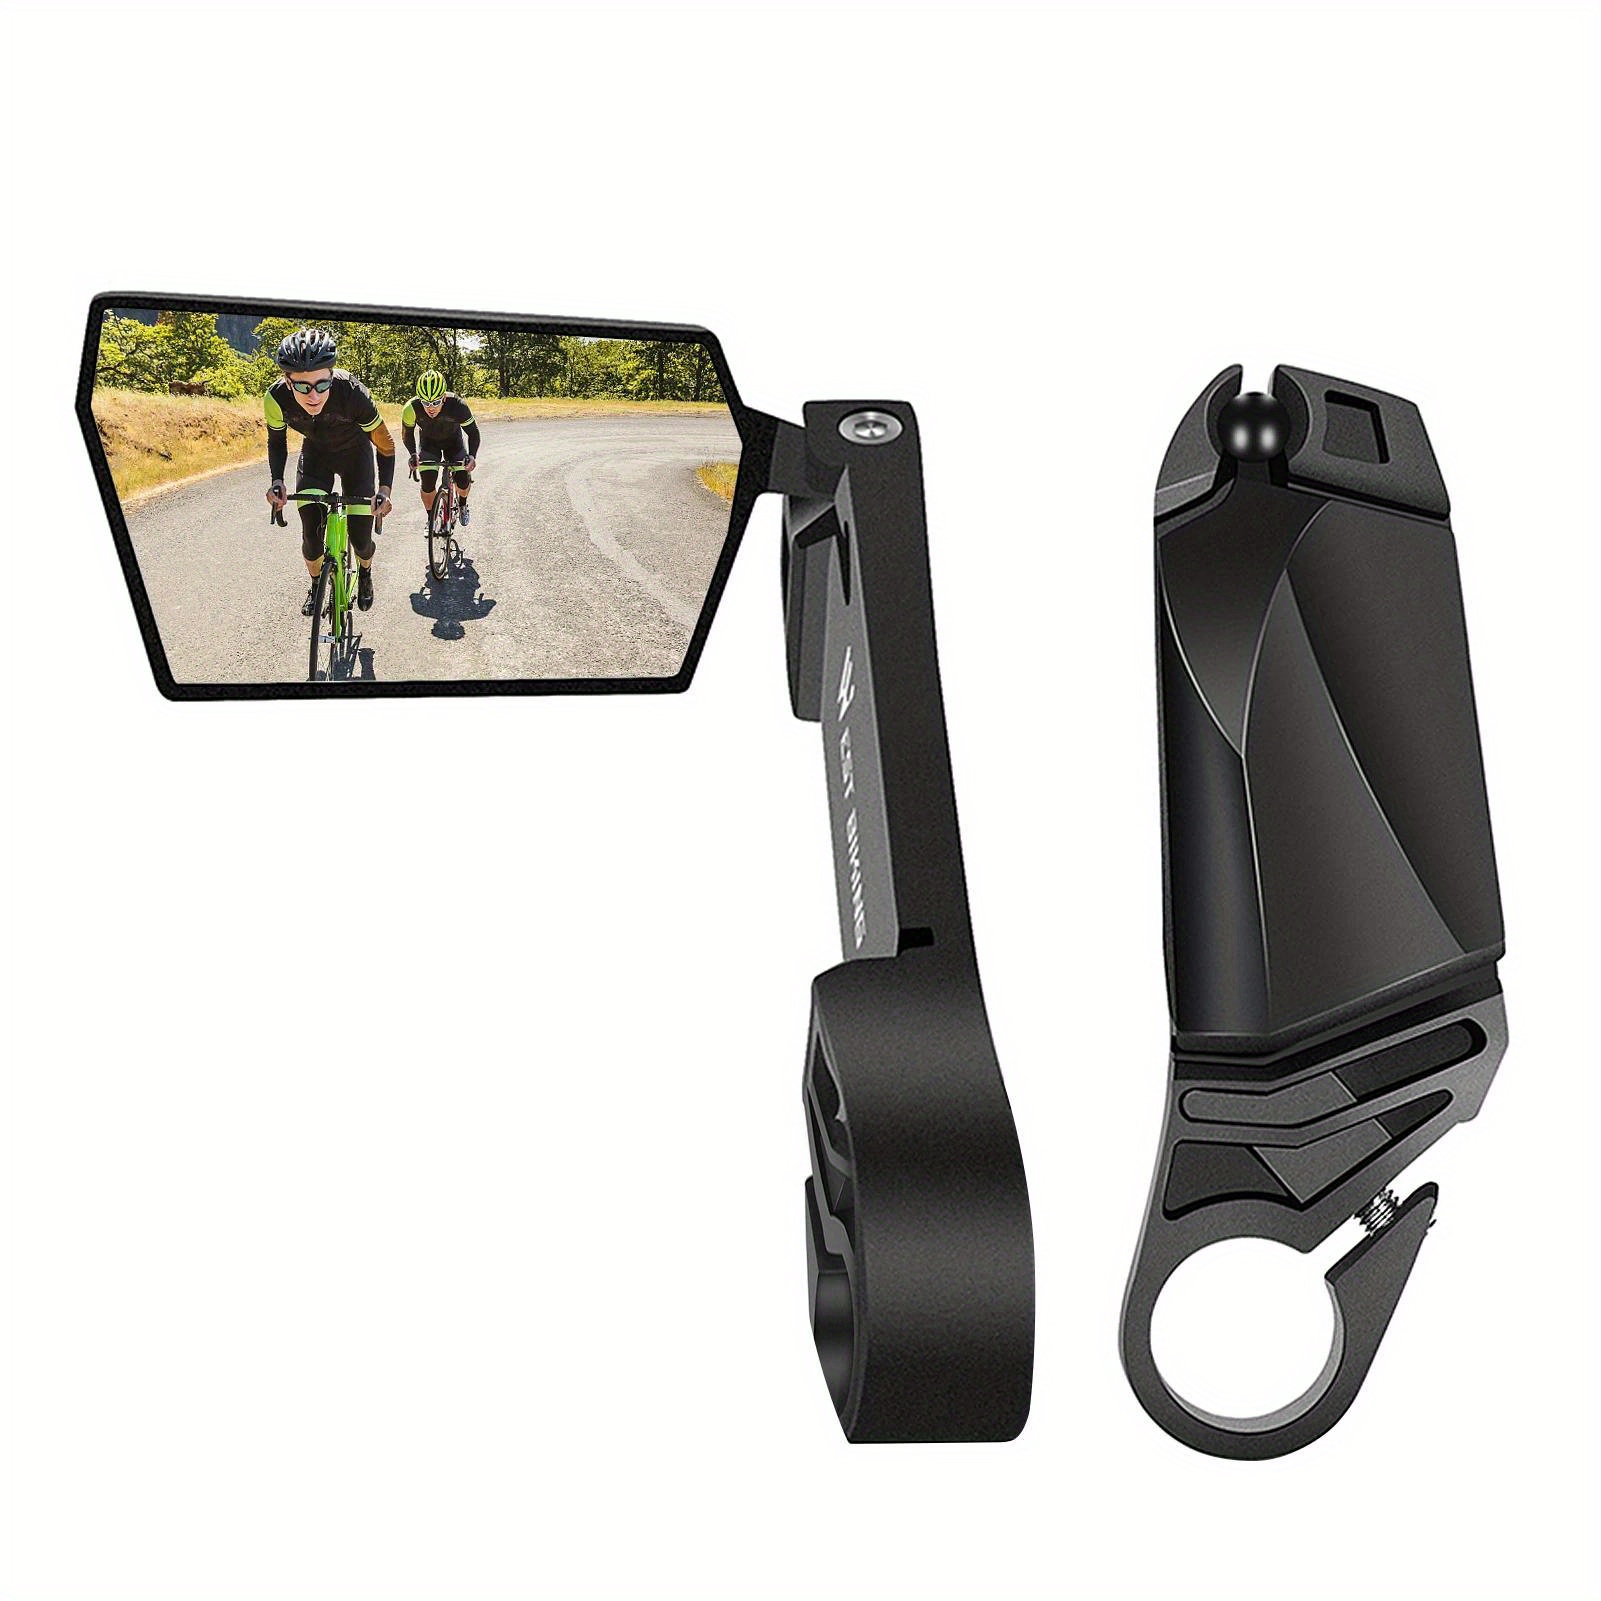 

2-piece Foldable Bike Rearview Mirrors - 360° Rotatable, Lightweight Aluminum Alloy For Enhanced Safety & Visibility Bike Mirrors For Handlebars Bicycle Mirrors For Handlebars